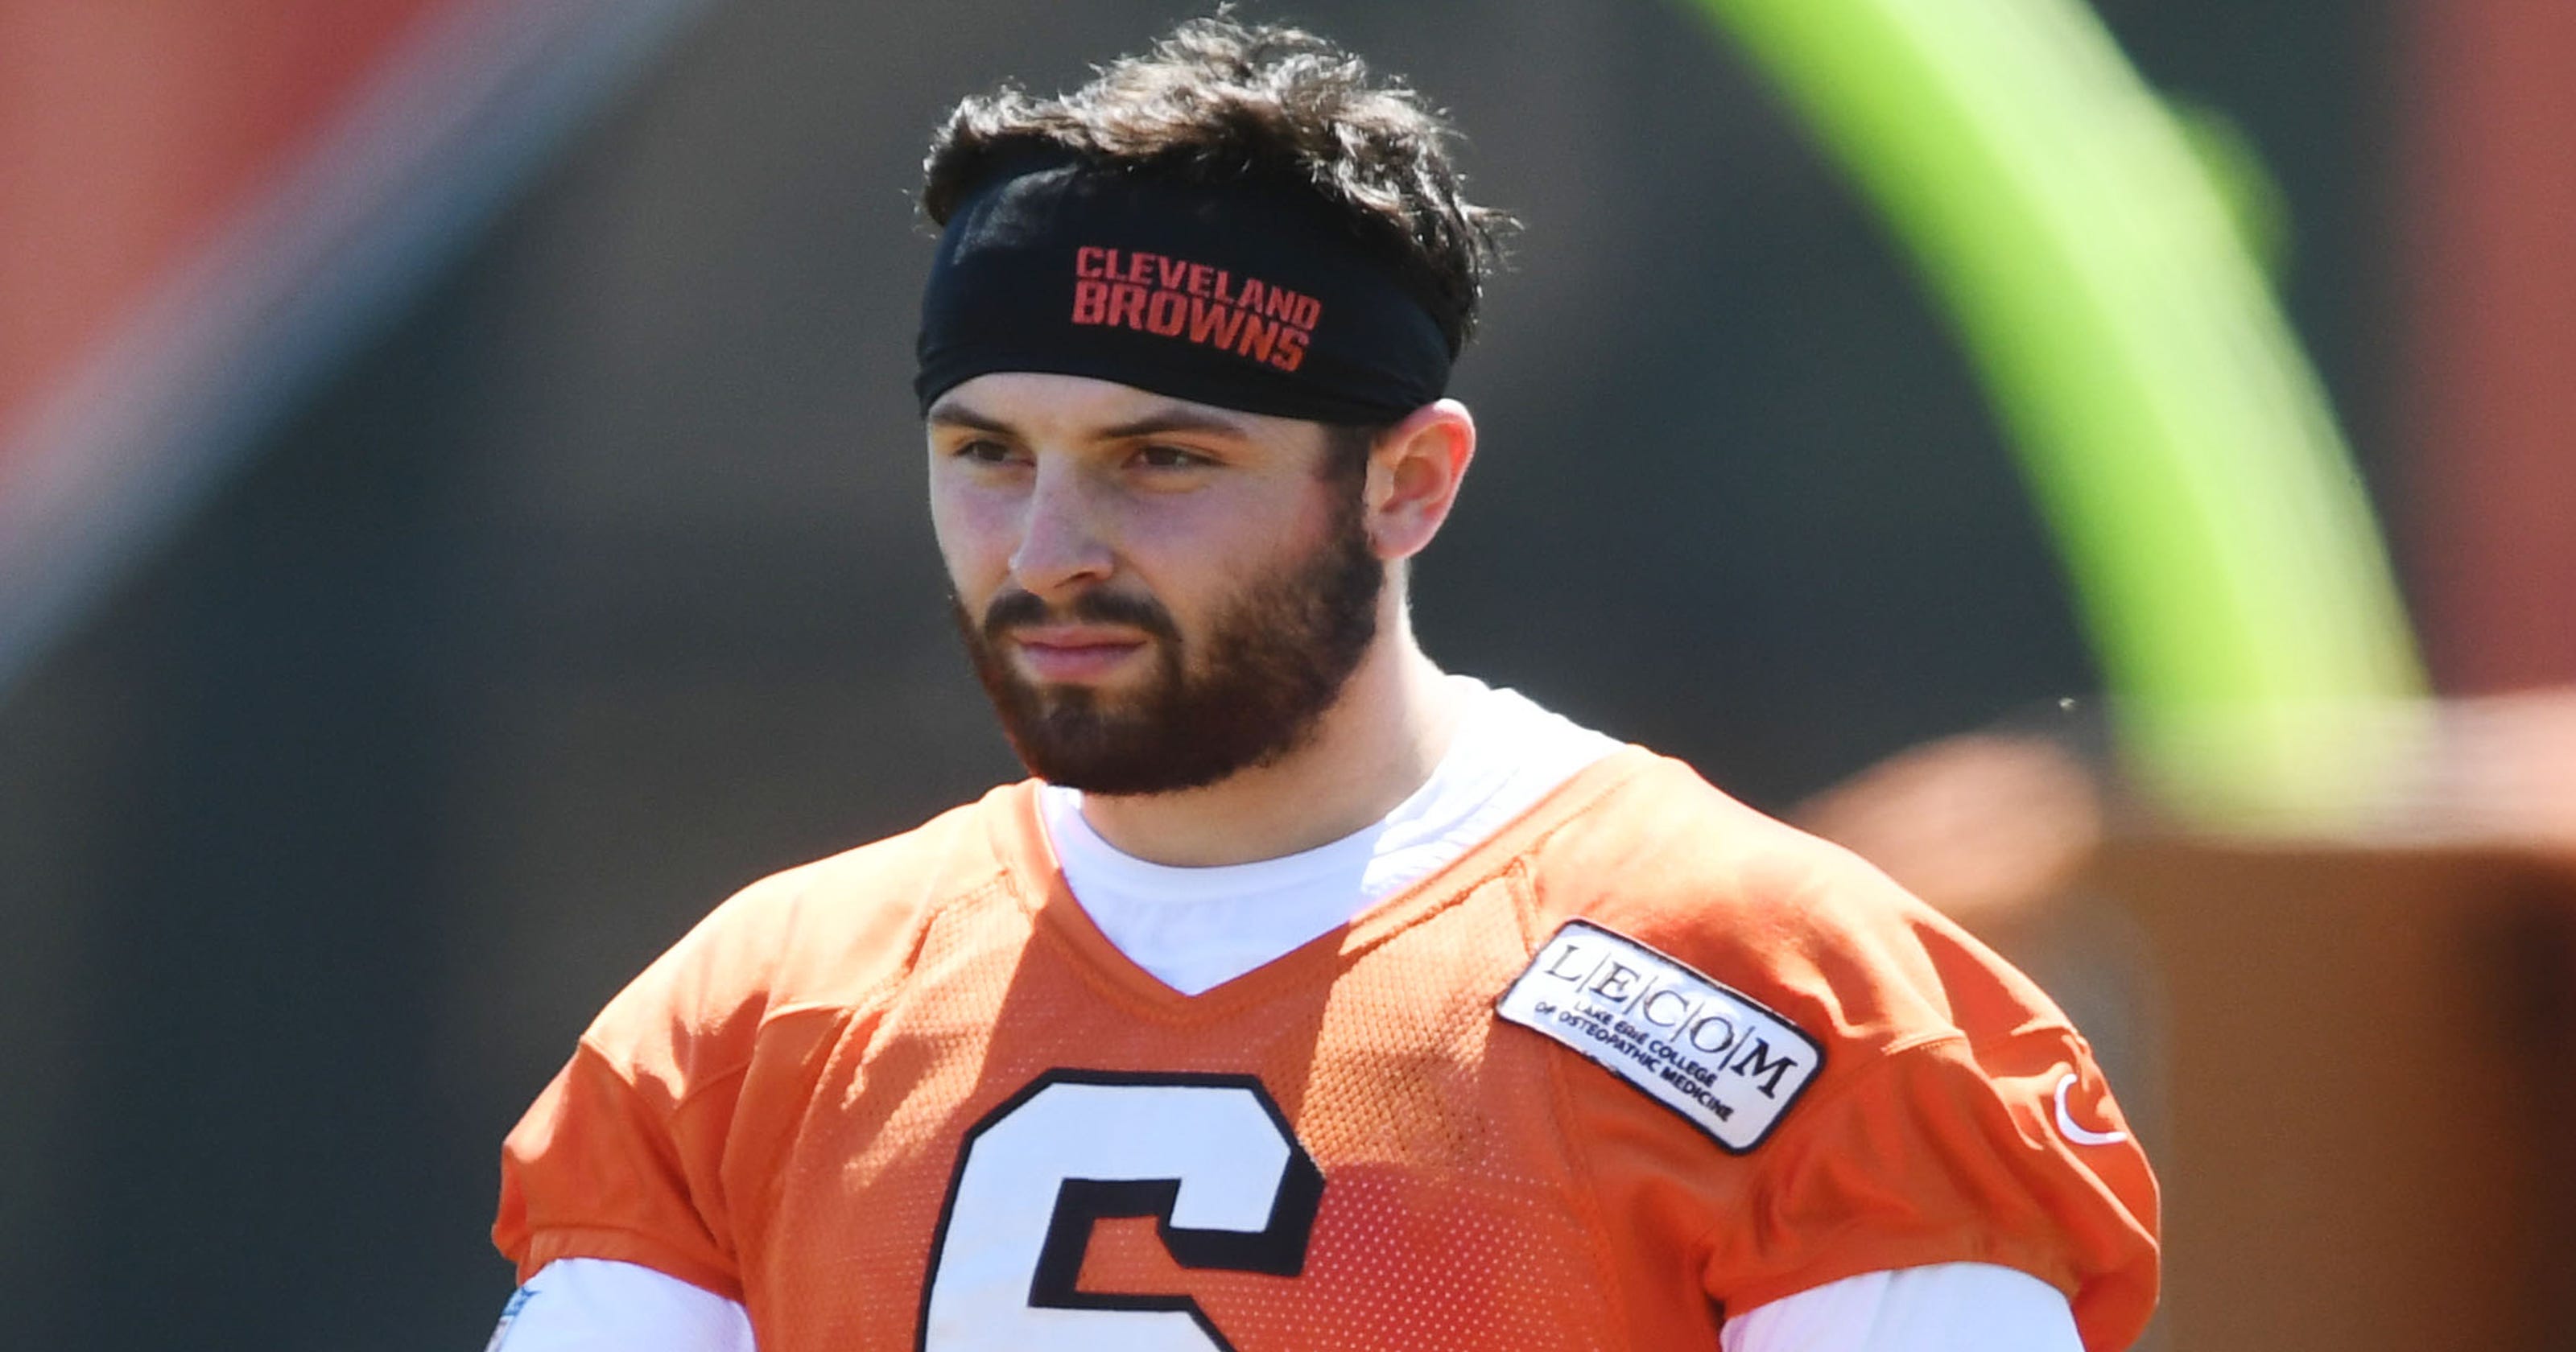 Cleveland Browns sign Baker Mayfield before opening of training camp3200 x 1680